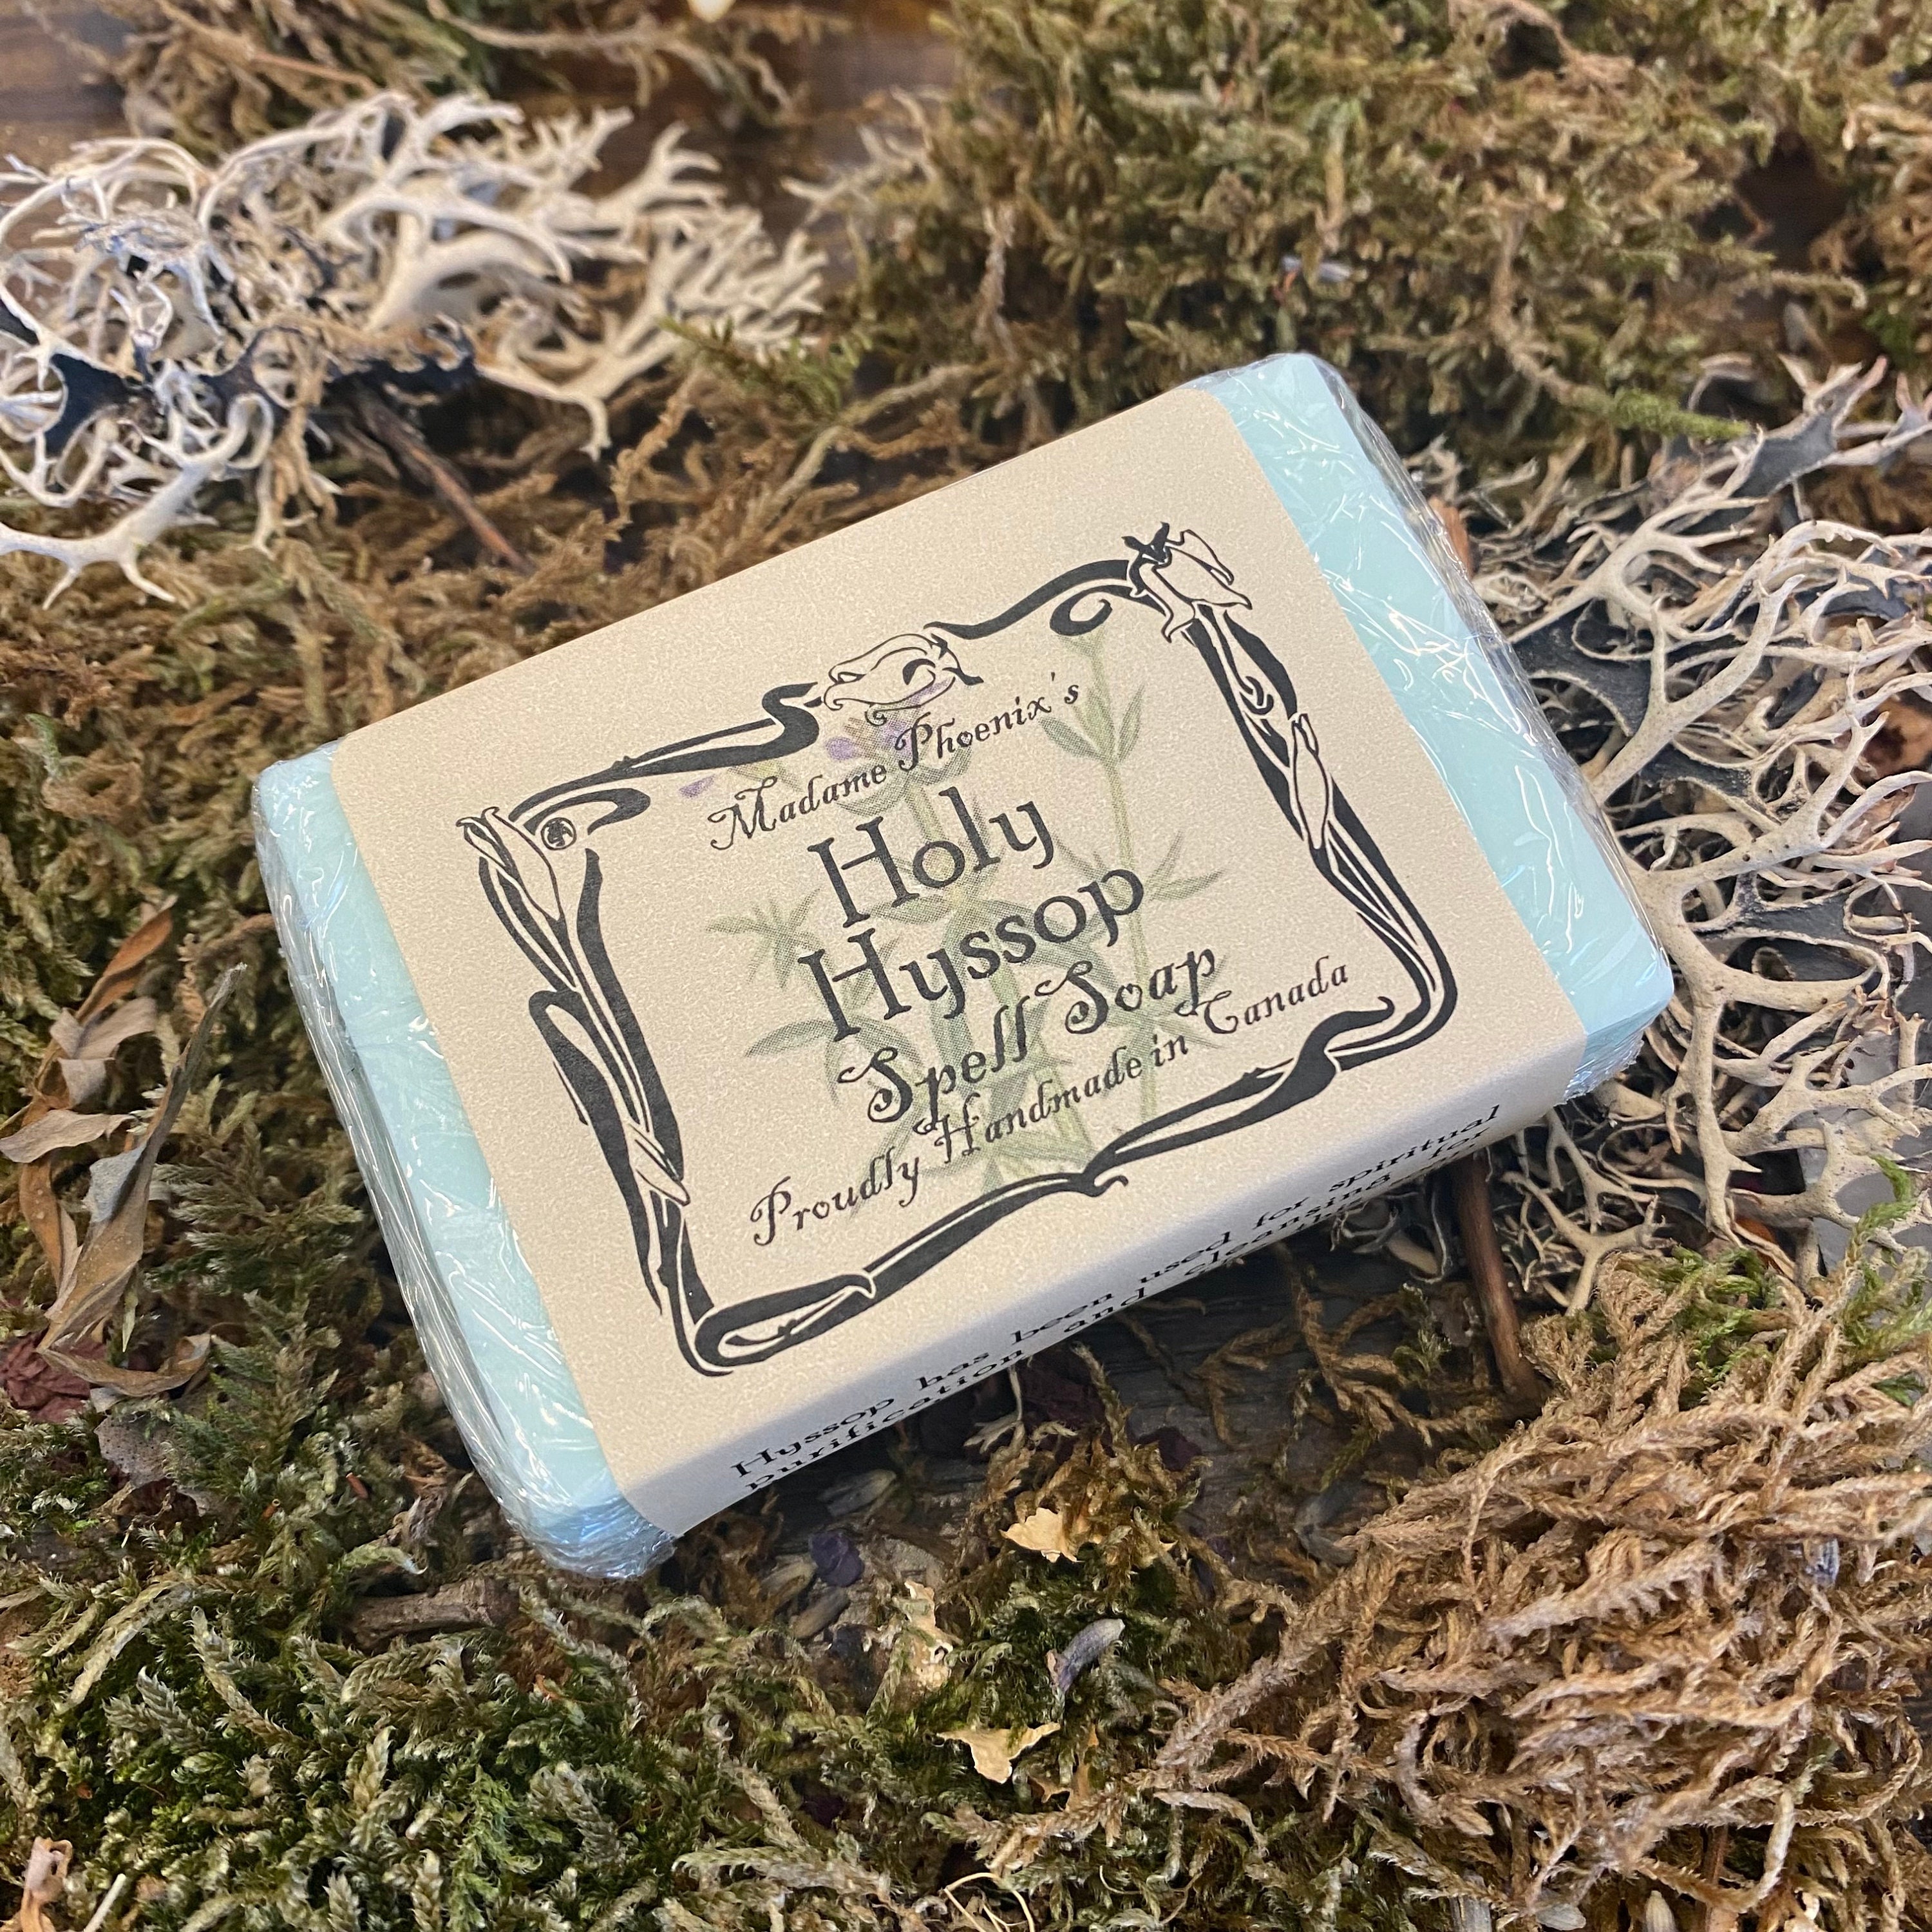  Money Drawing Attraction Spiritual Soap to Cleanse Your Aura  Balance Chakras Fast Luck Highly Scented Herbal Soap Cleansing of the Body  in Spiritual Baths, Remove Negative Energy Spirits & Uncrossing 